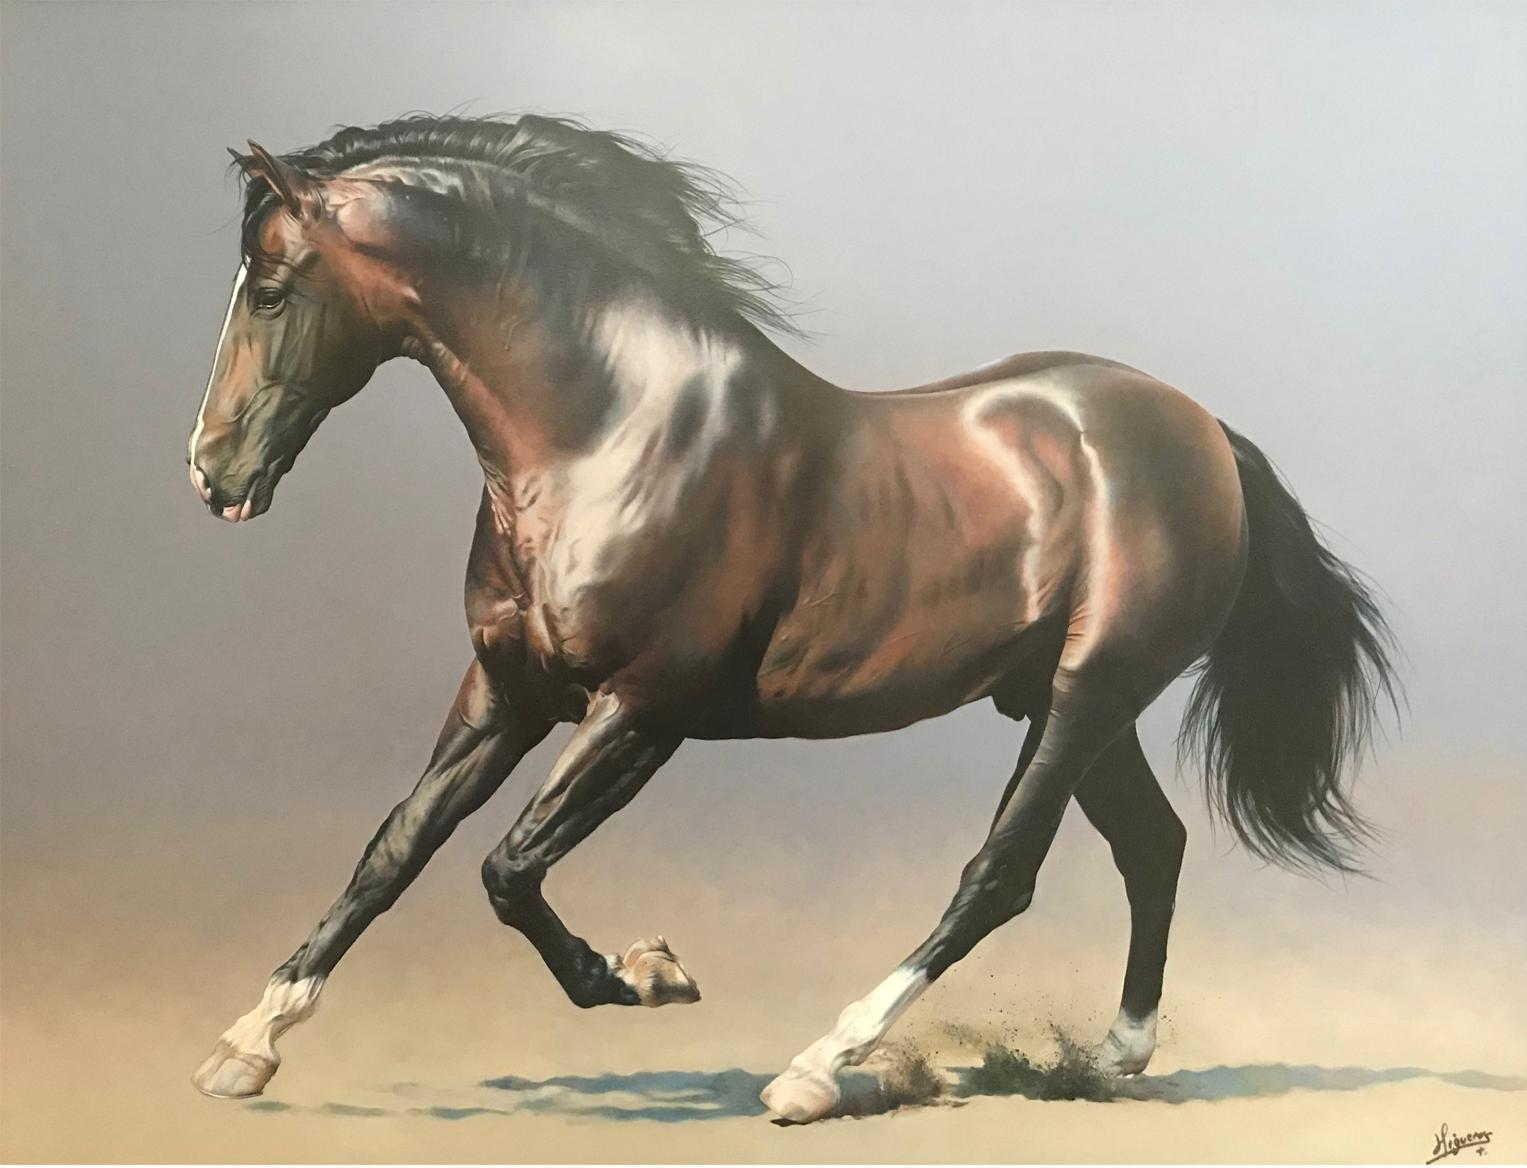 Manolo Higueras Interior Painting - REALISM - HORSE